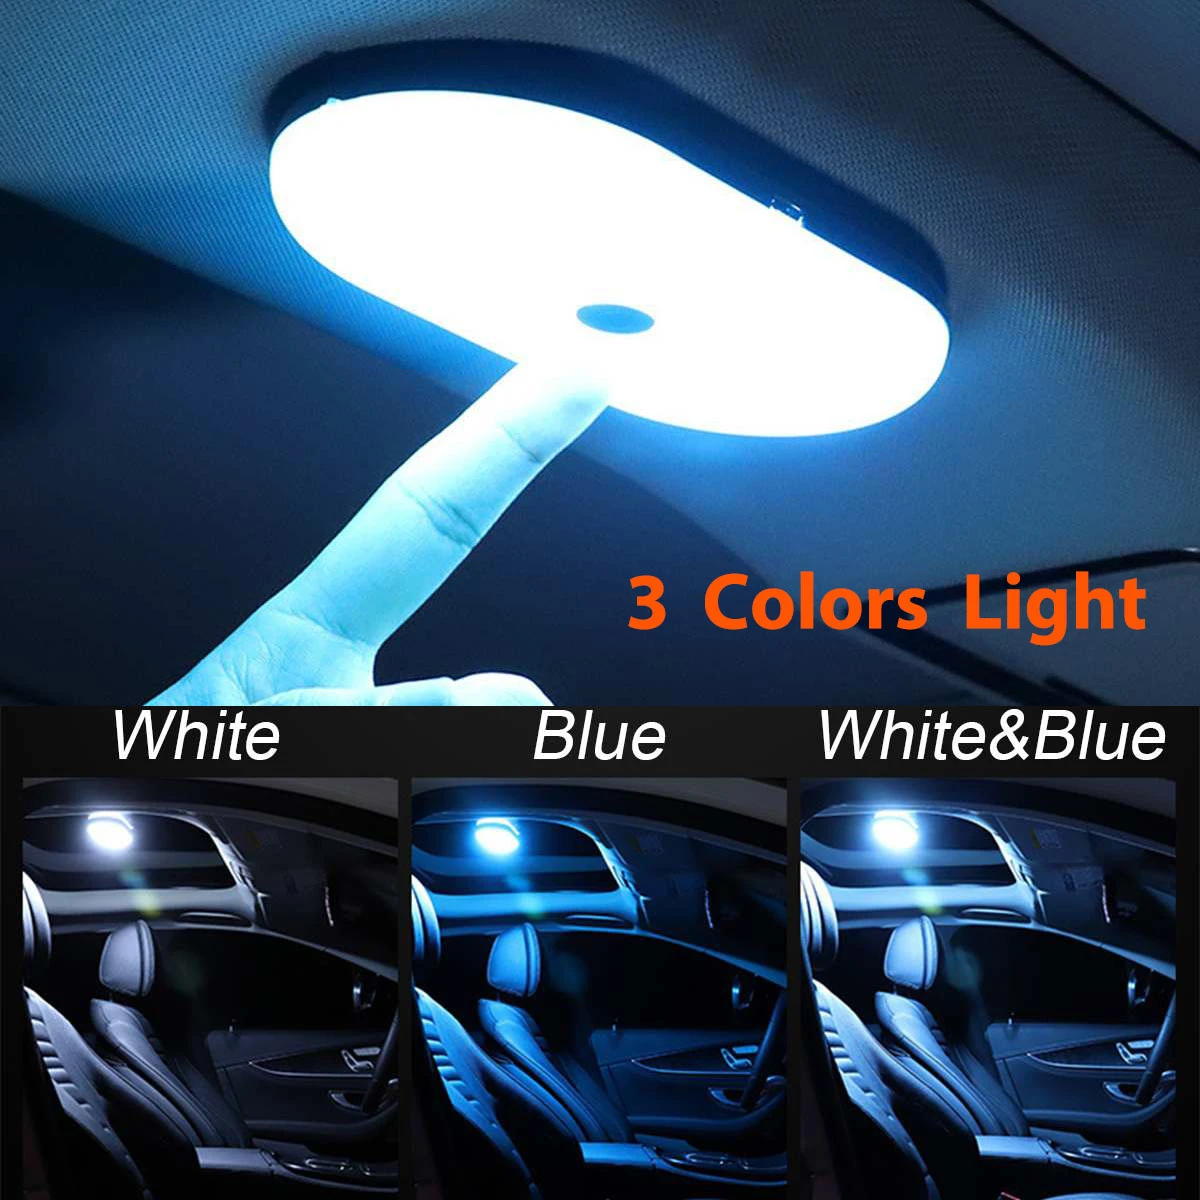 

Automobile Car LED Interior reading light Dome 3 Color Light Changing USB Charging Roof Ceiling Magnet Lamp Night Light